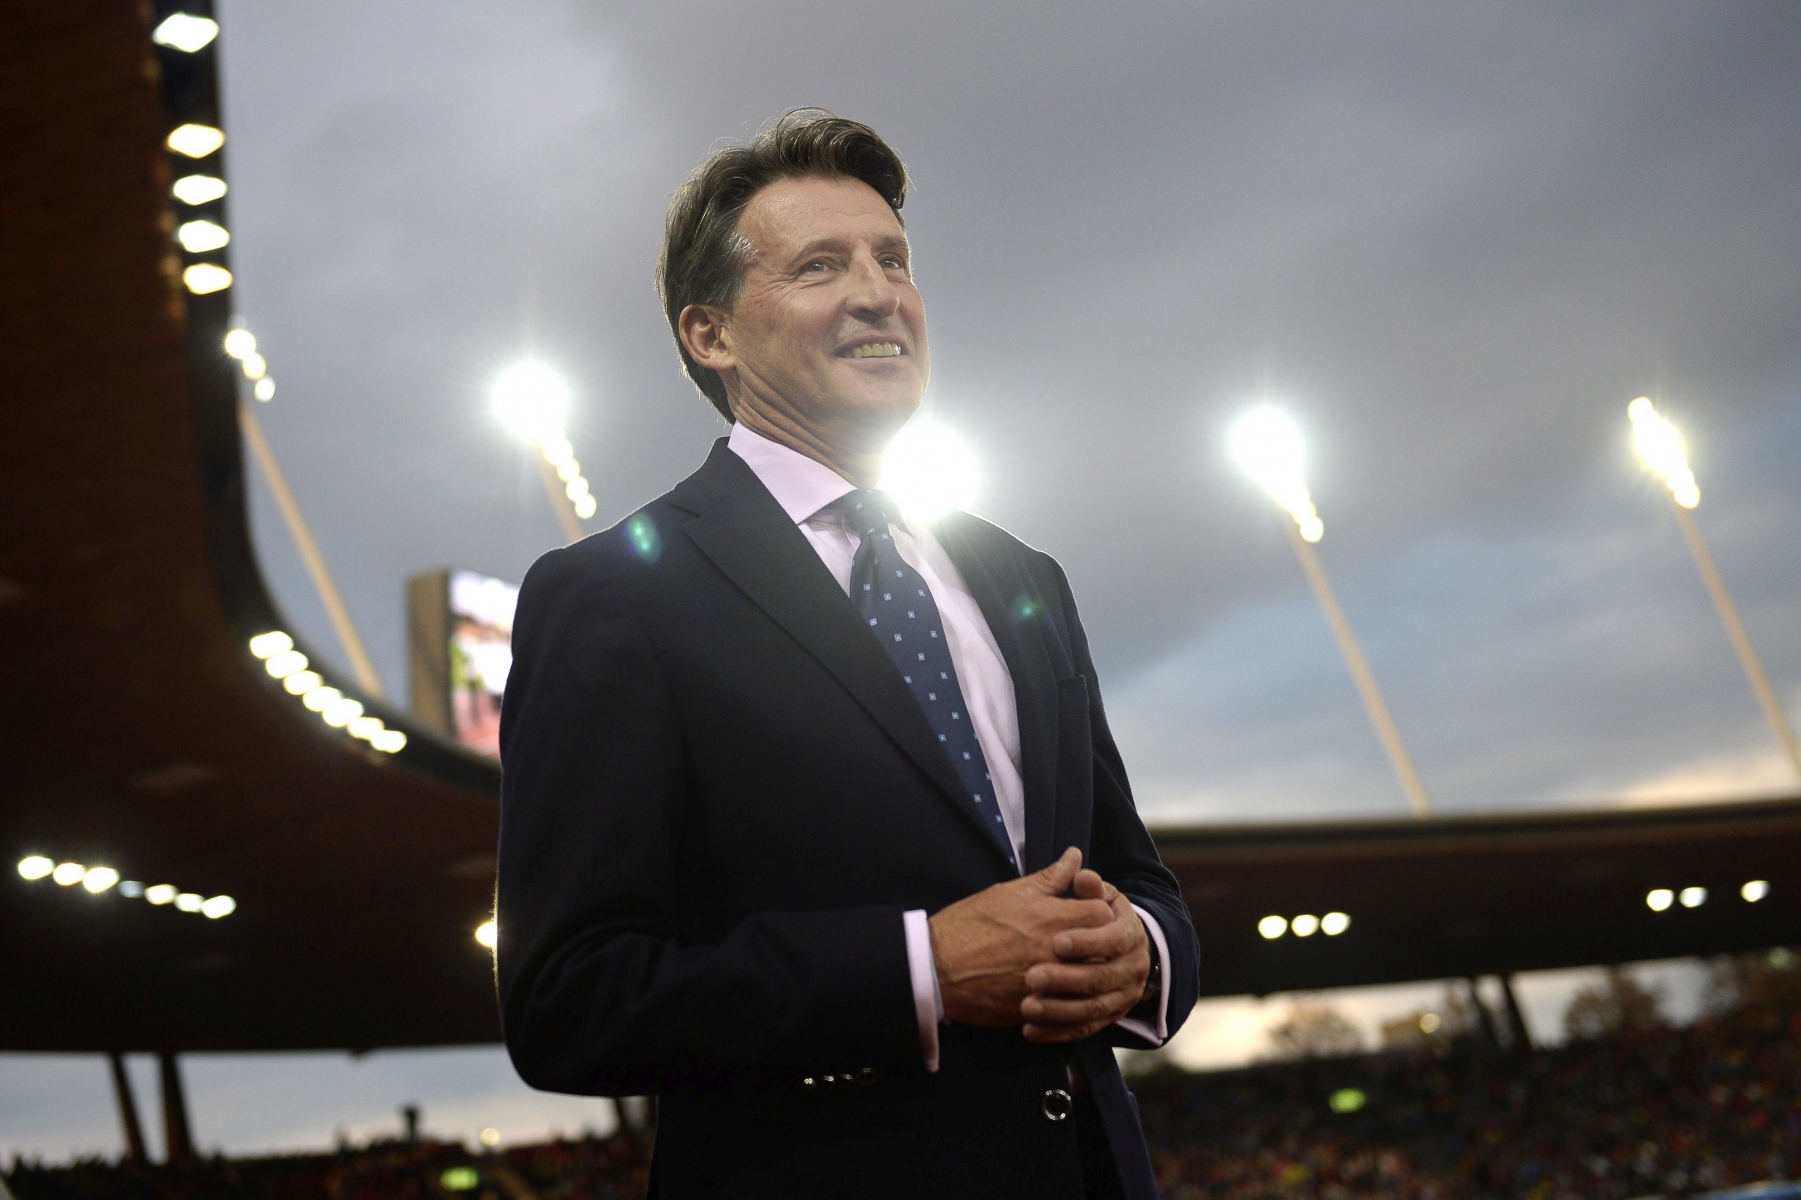 epa05050708 (FILE) A file picture dated 03 September 2015 of IAAF President Lord Sebastian Coe before the Weltklasse IAAF Diamond League international athletics meeting at the Letzigrund stadium in Zurich, Switzerland. Sebastian Coe, president of the athletics governing body IAAF, has been elected as chairman of the board of the Diamond League series of meetings, the IAAF confirmed on 01 December 2015. (KEYSTONE/JEAN-CHRISTOPHE BOTT) *** Local Caption *** 52186229